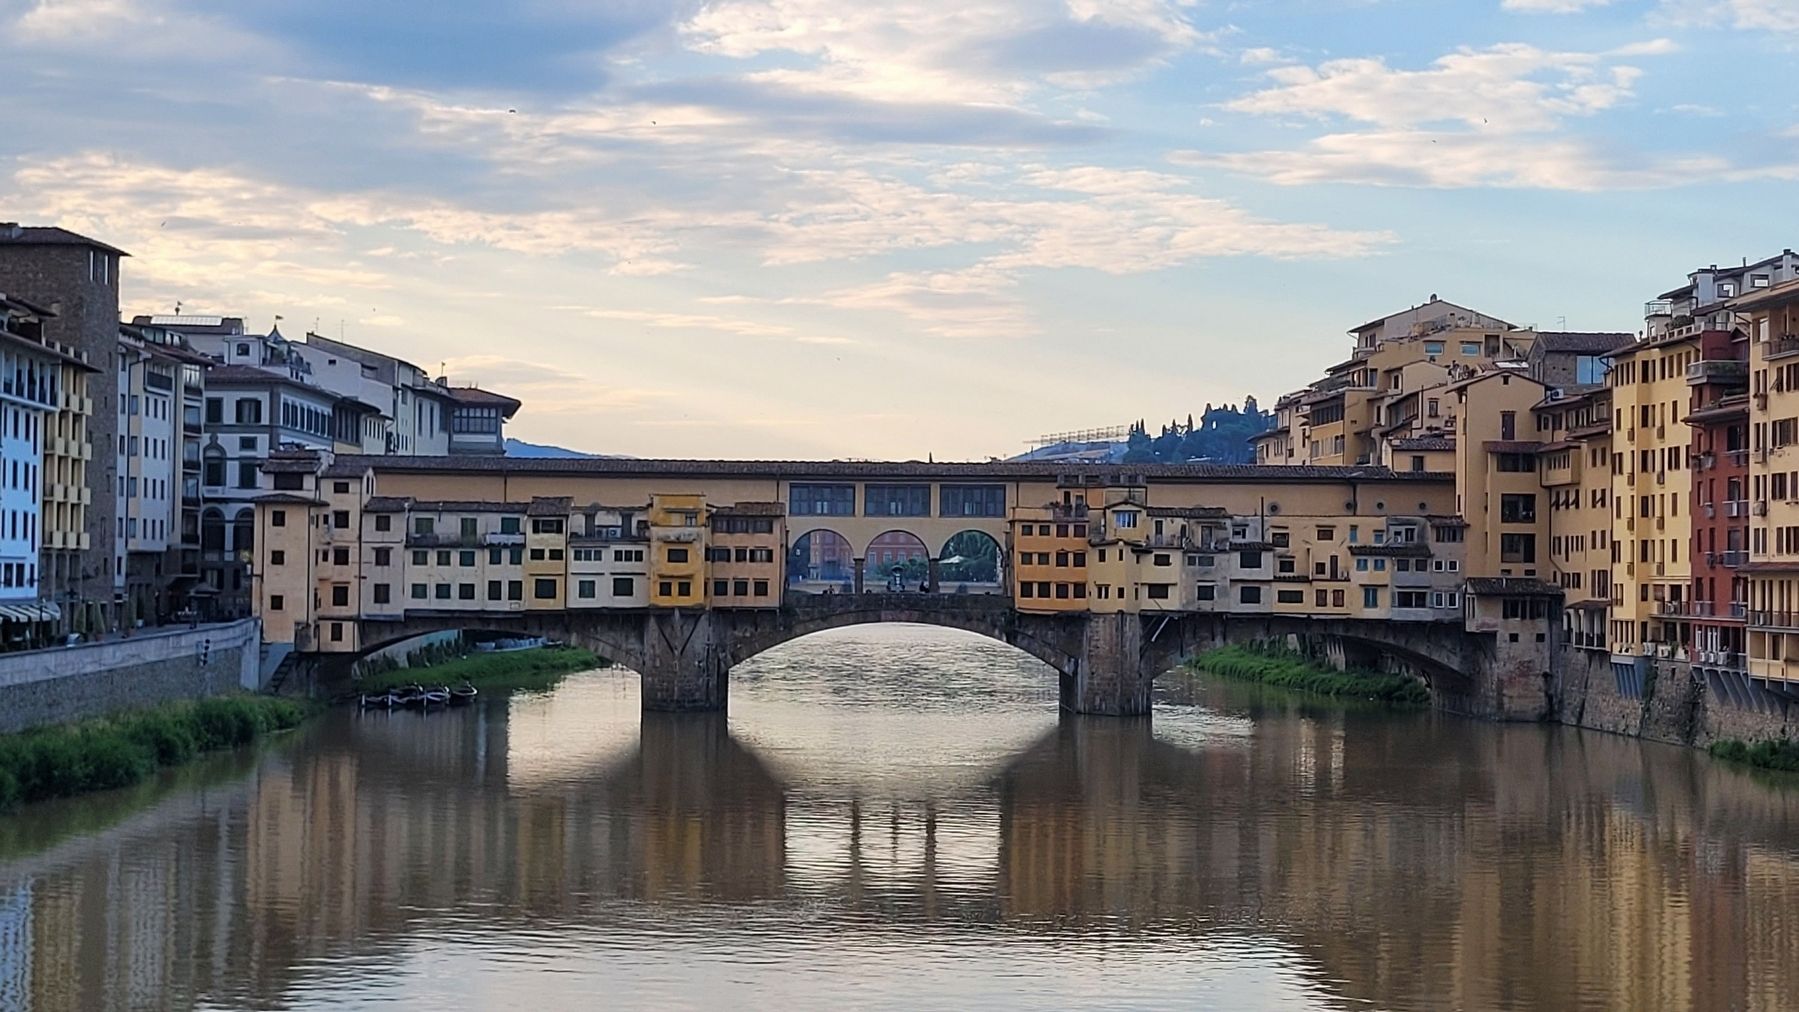 The view of the Ponte Vecchio (Old Bridge) looking east from another bridge image. Click for full size.